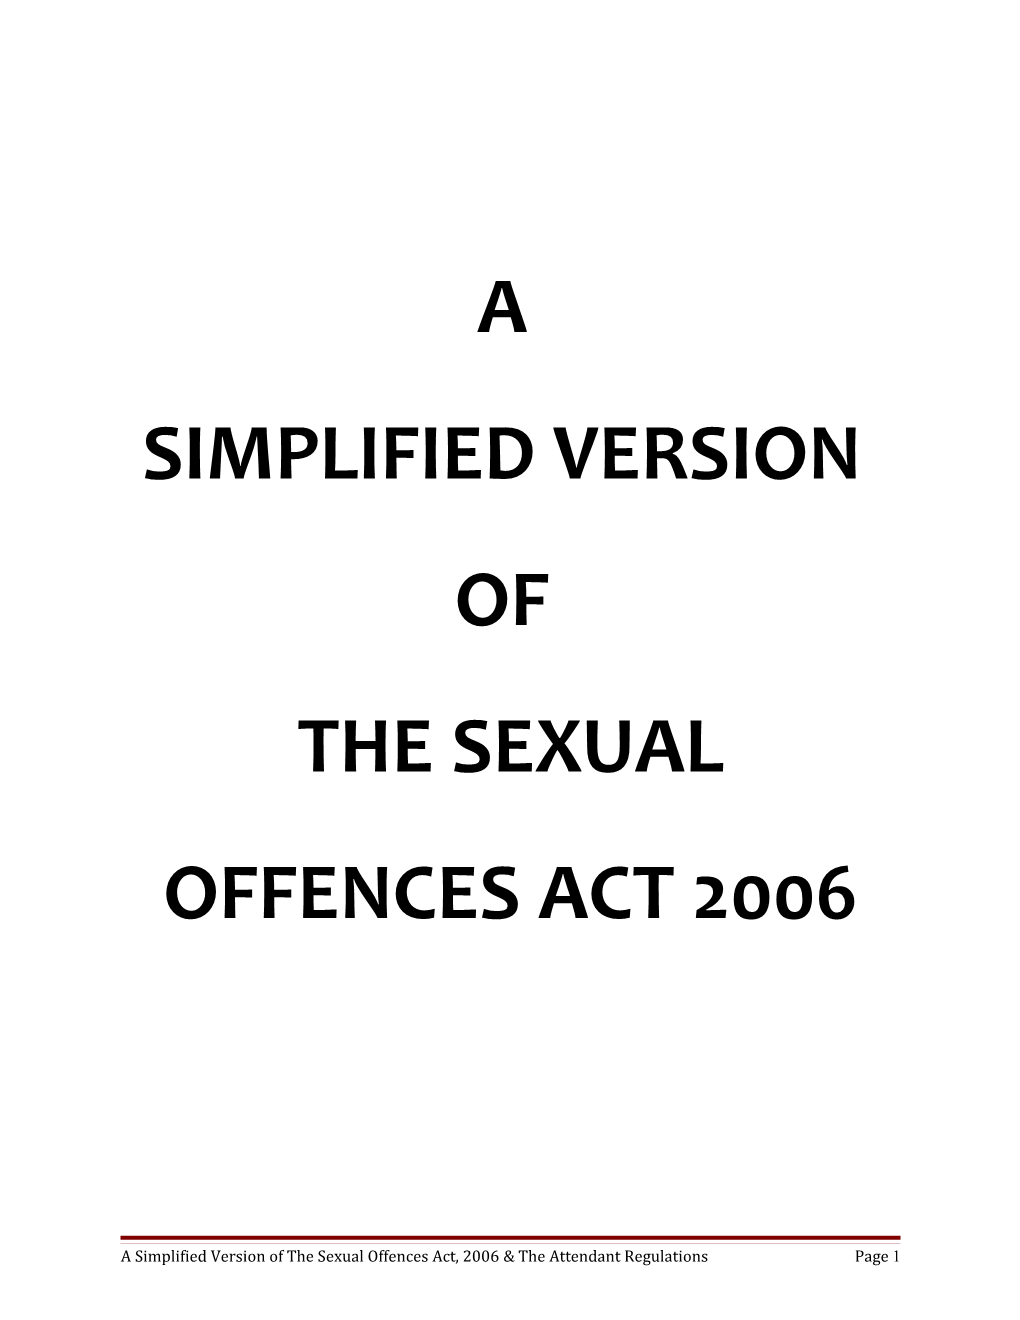 The Sexual Offences Act 2006